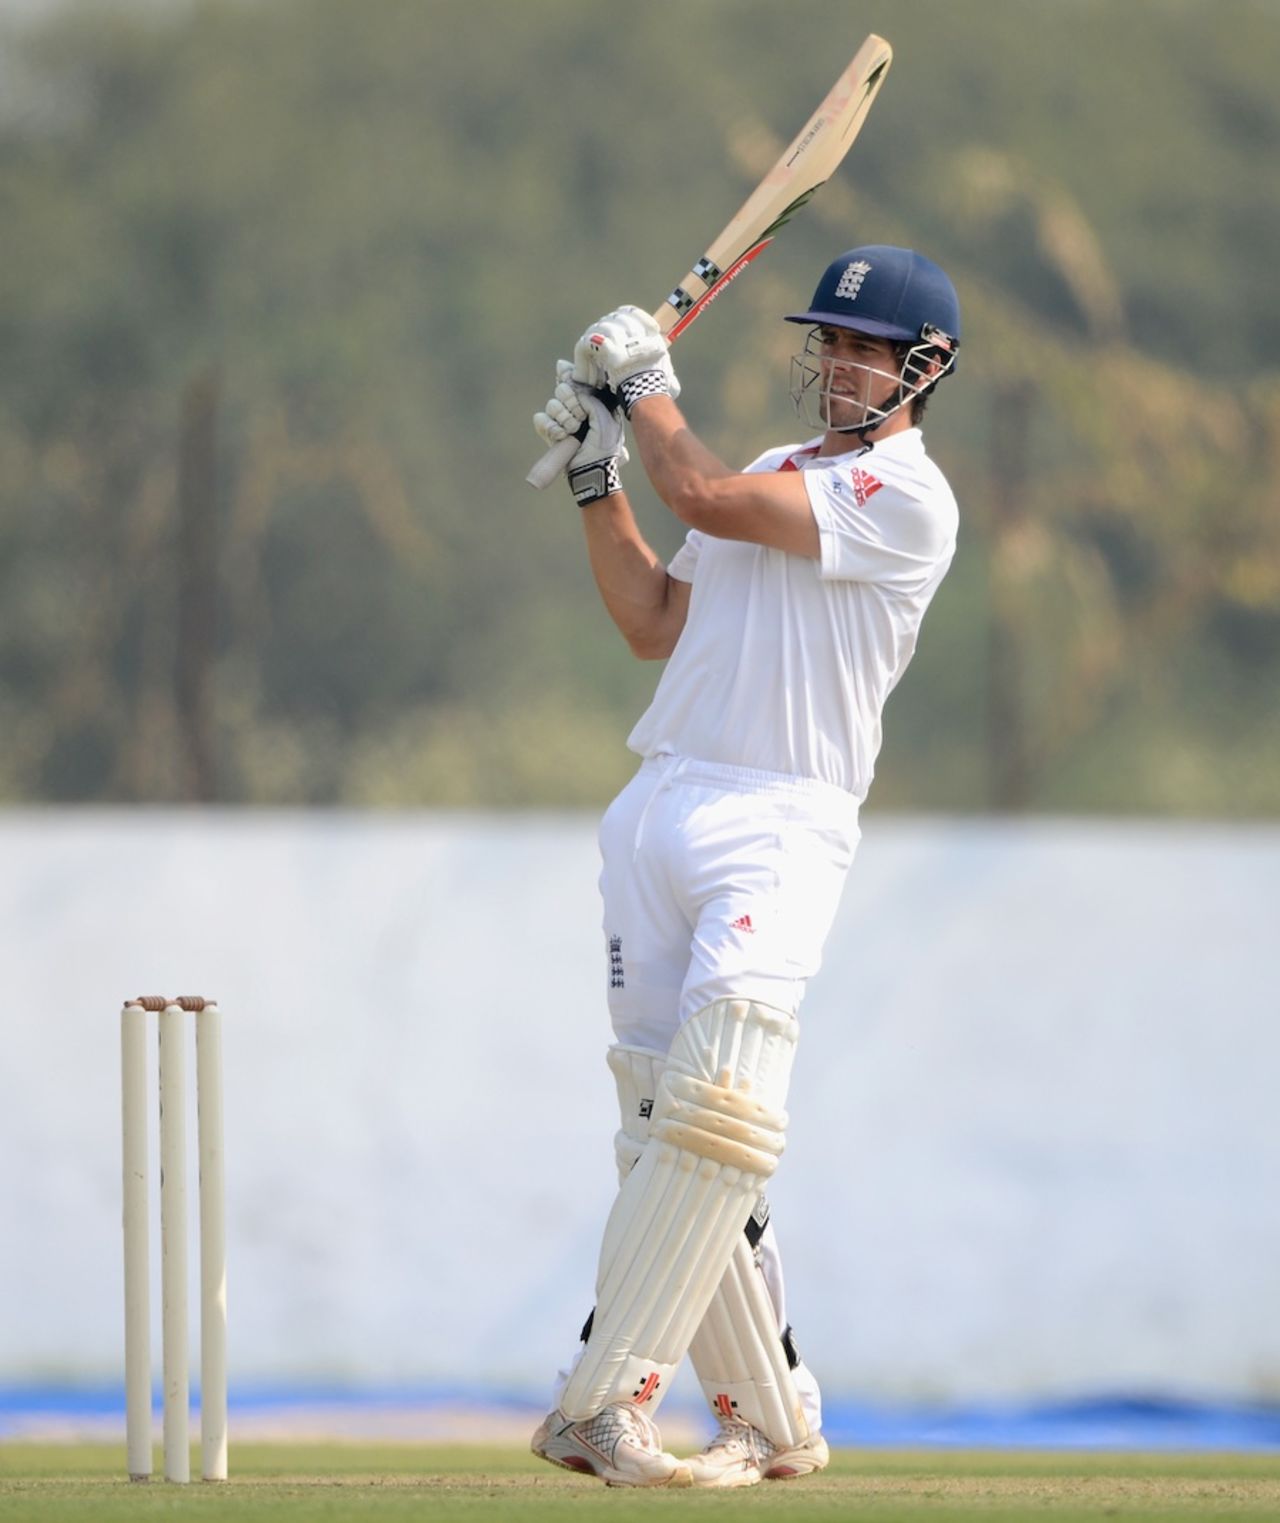 Alastair Cook batted fluently and scored 97, Haryana v England XI, 1st day, Ahmedabad, November 8, 2012